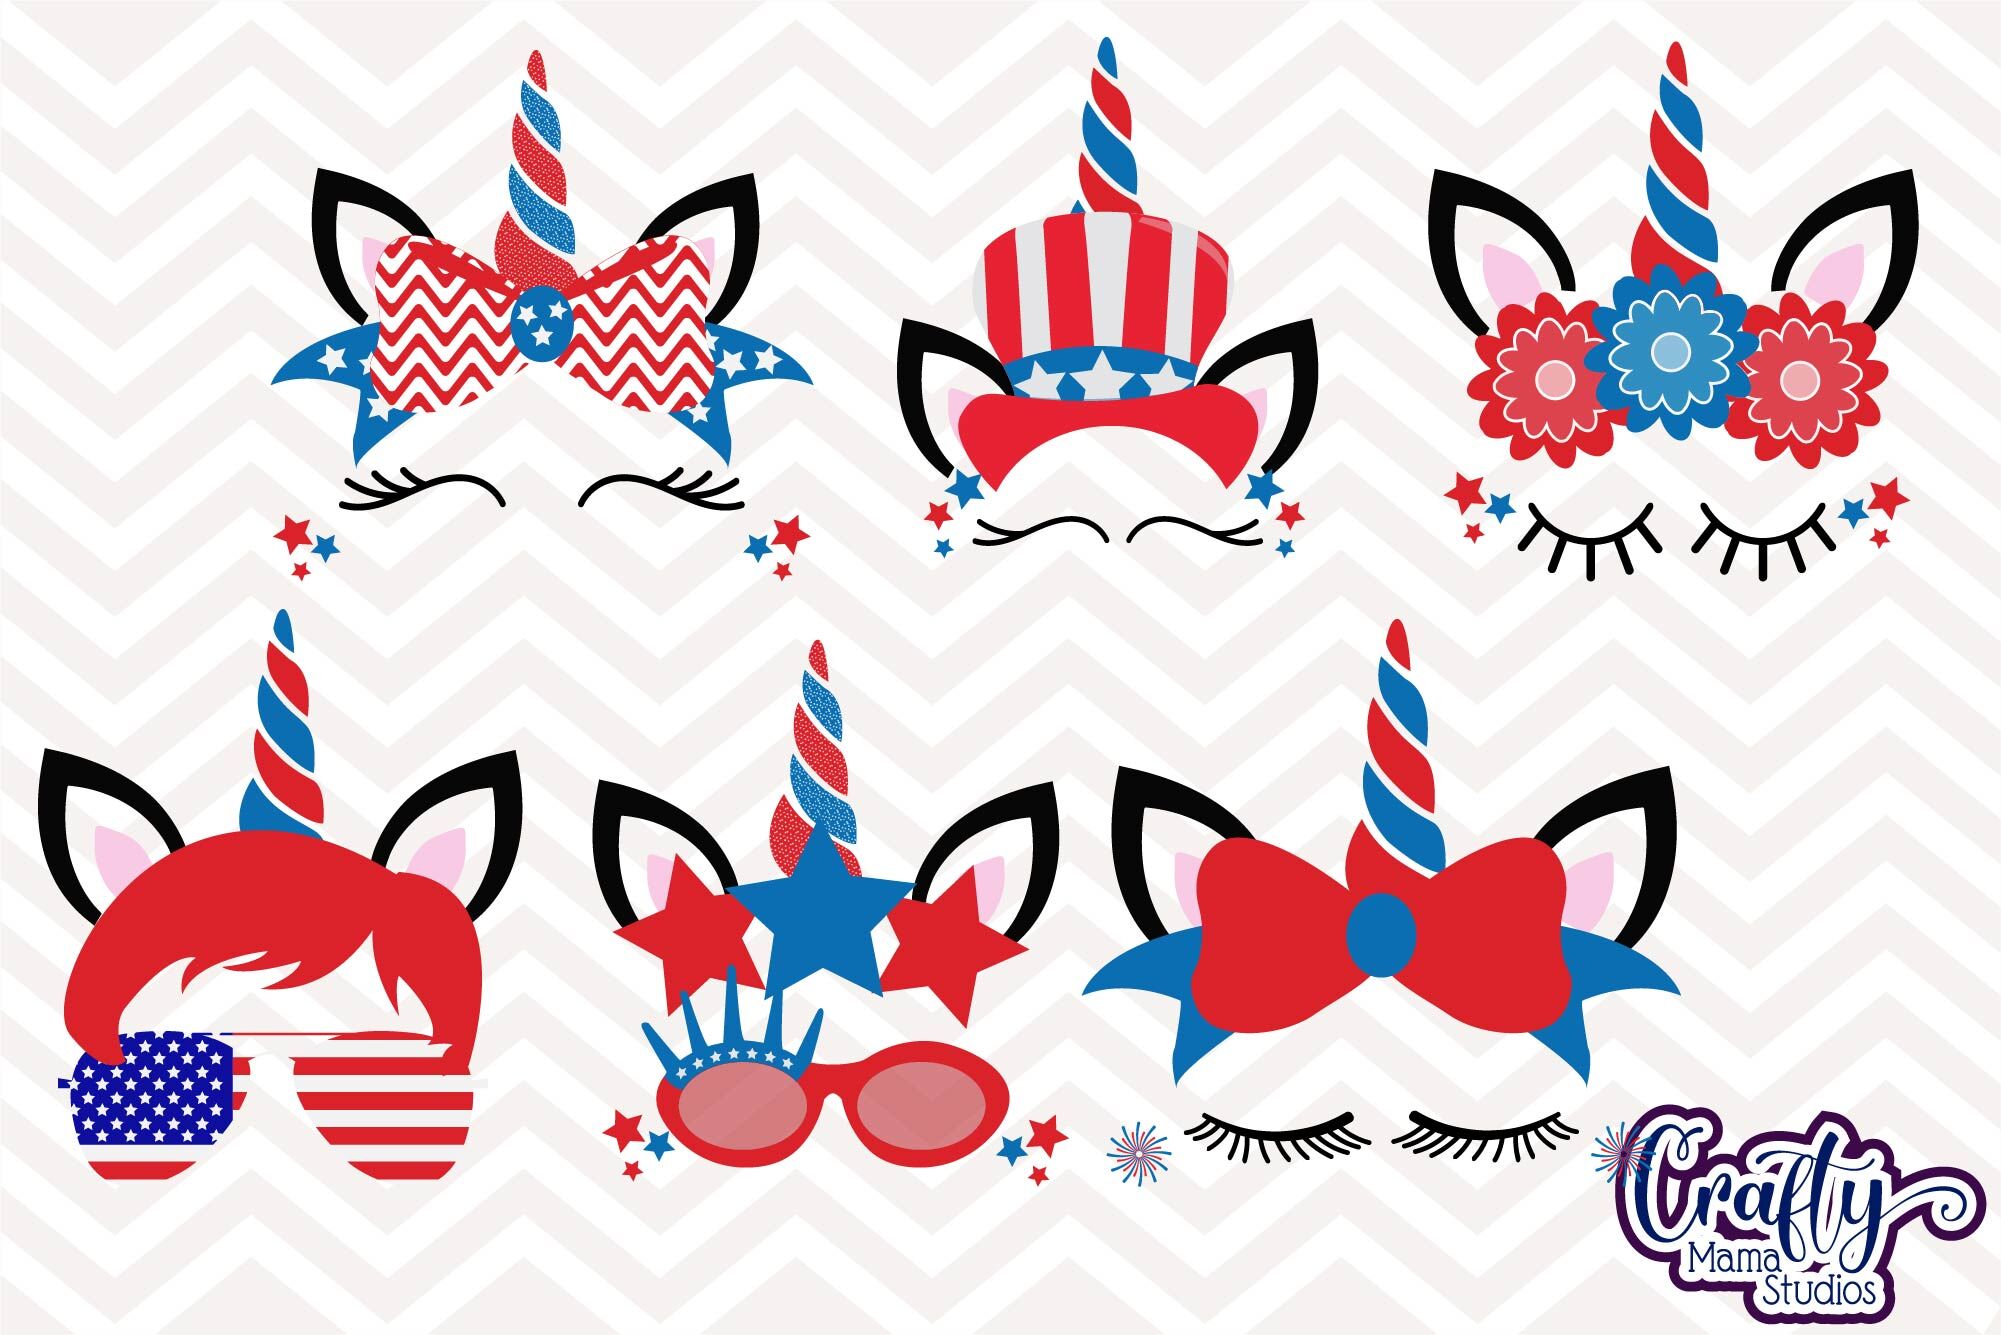 Download July 4th Unicorn Svg Independence Day Clip Art 4th Of July By Crafty Mama Studios Thehungryjpeg Com PSD Mockup Templates